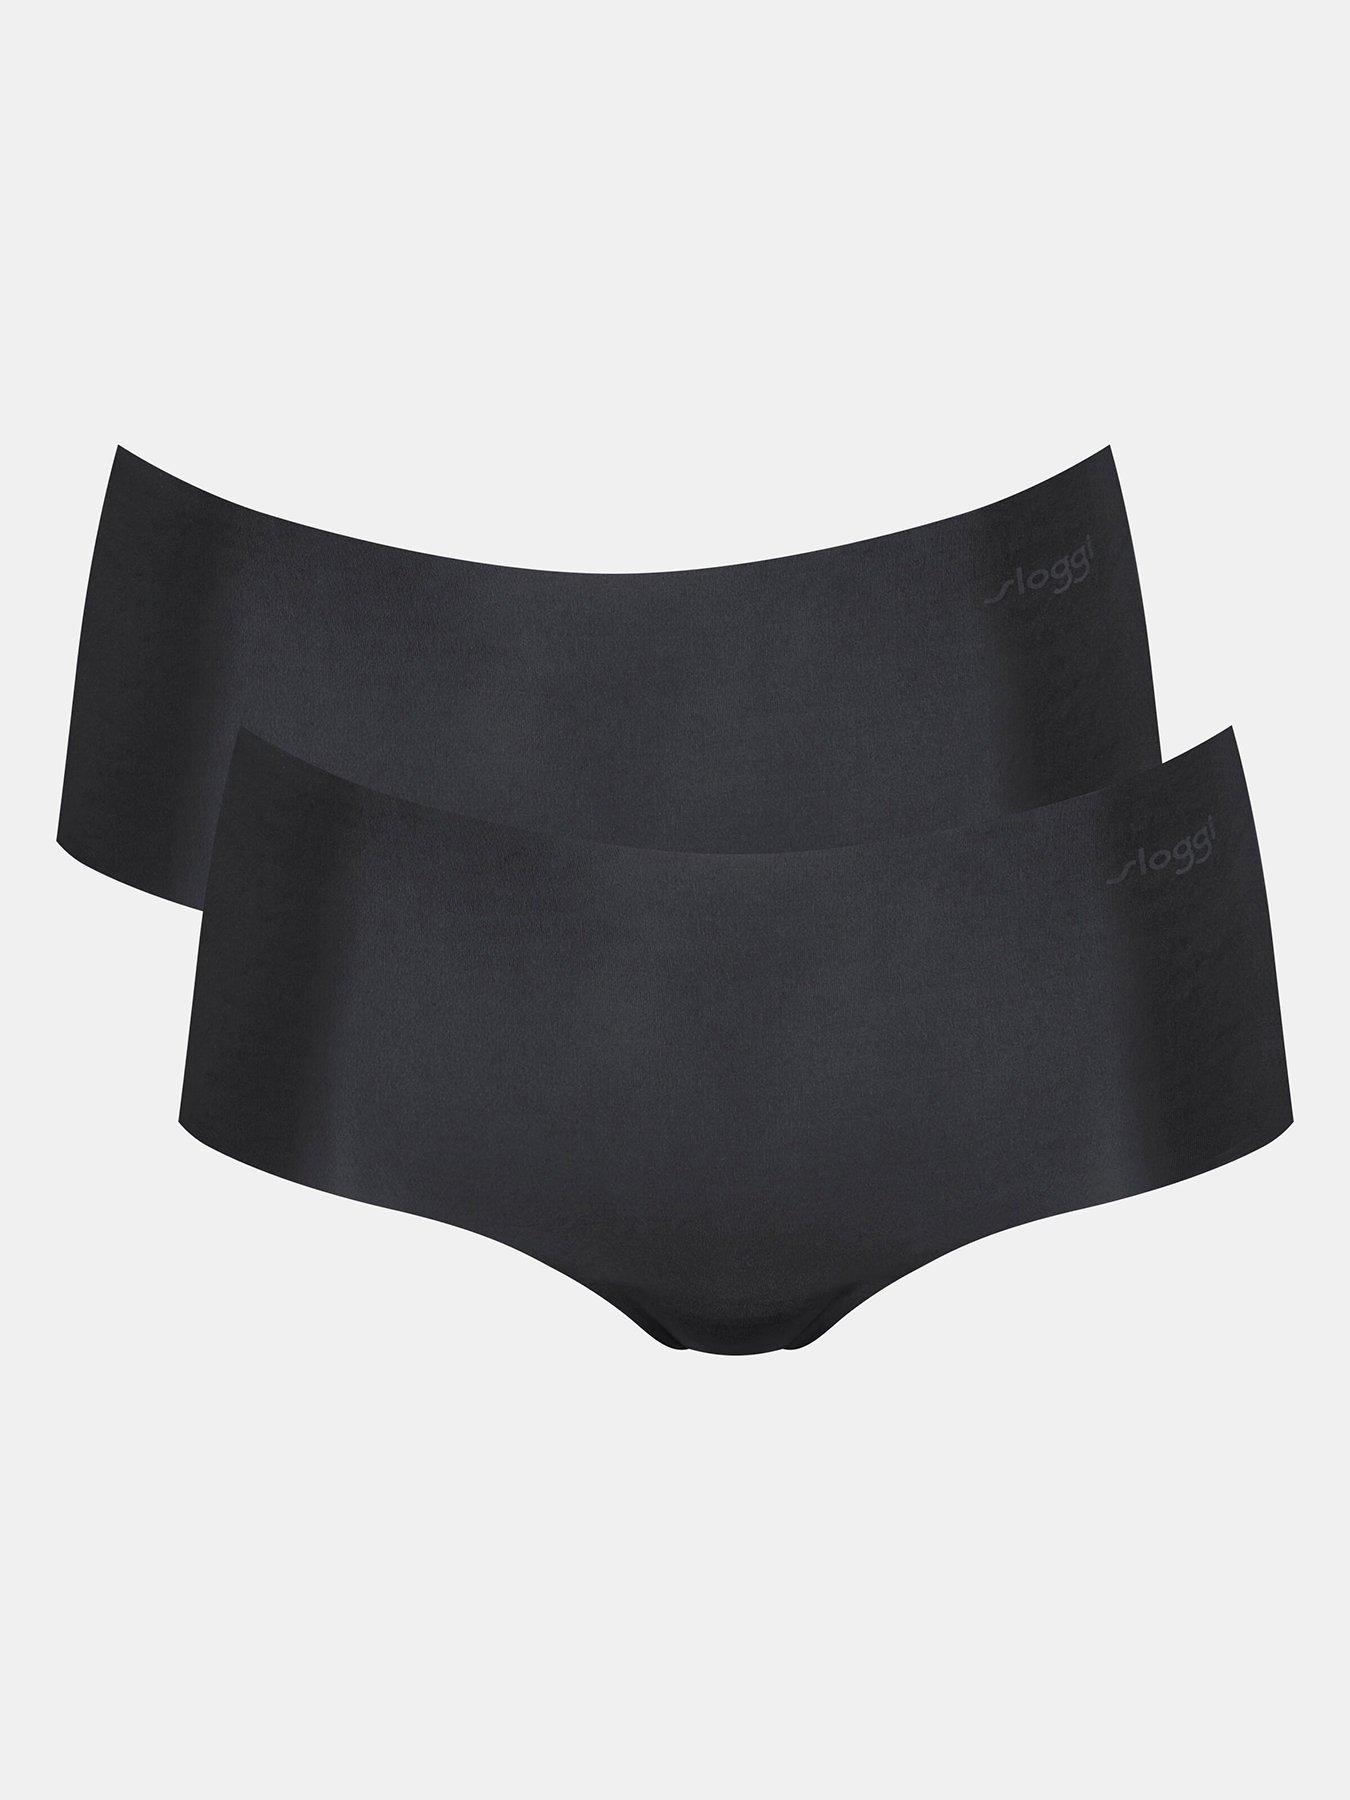 Millie Cotton Pack Hipster Black Hipster Panties (Pack of 3), XS-L